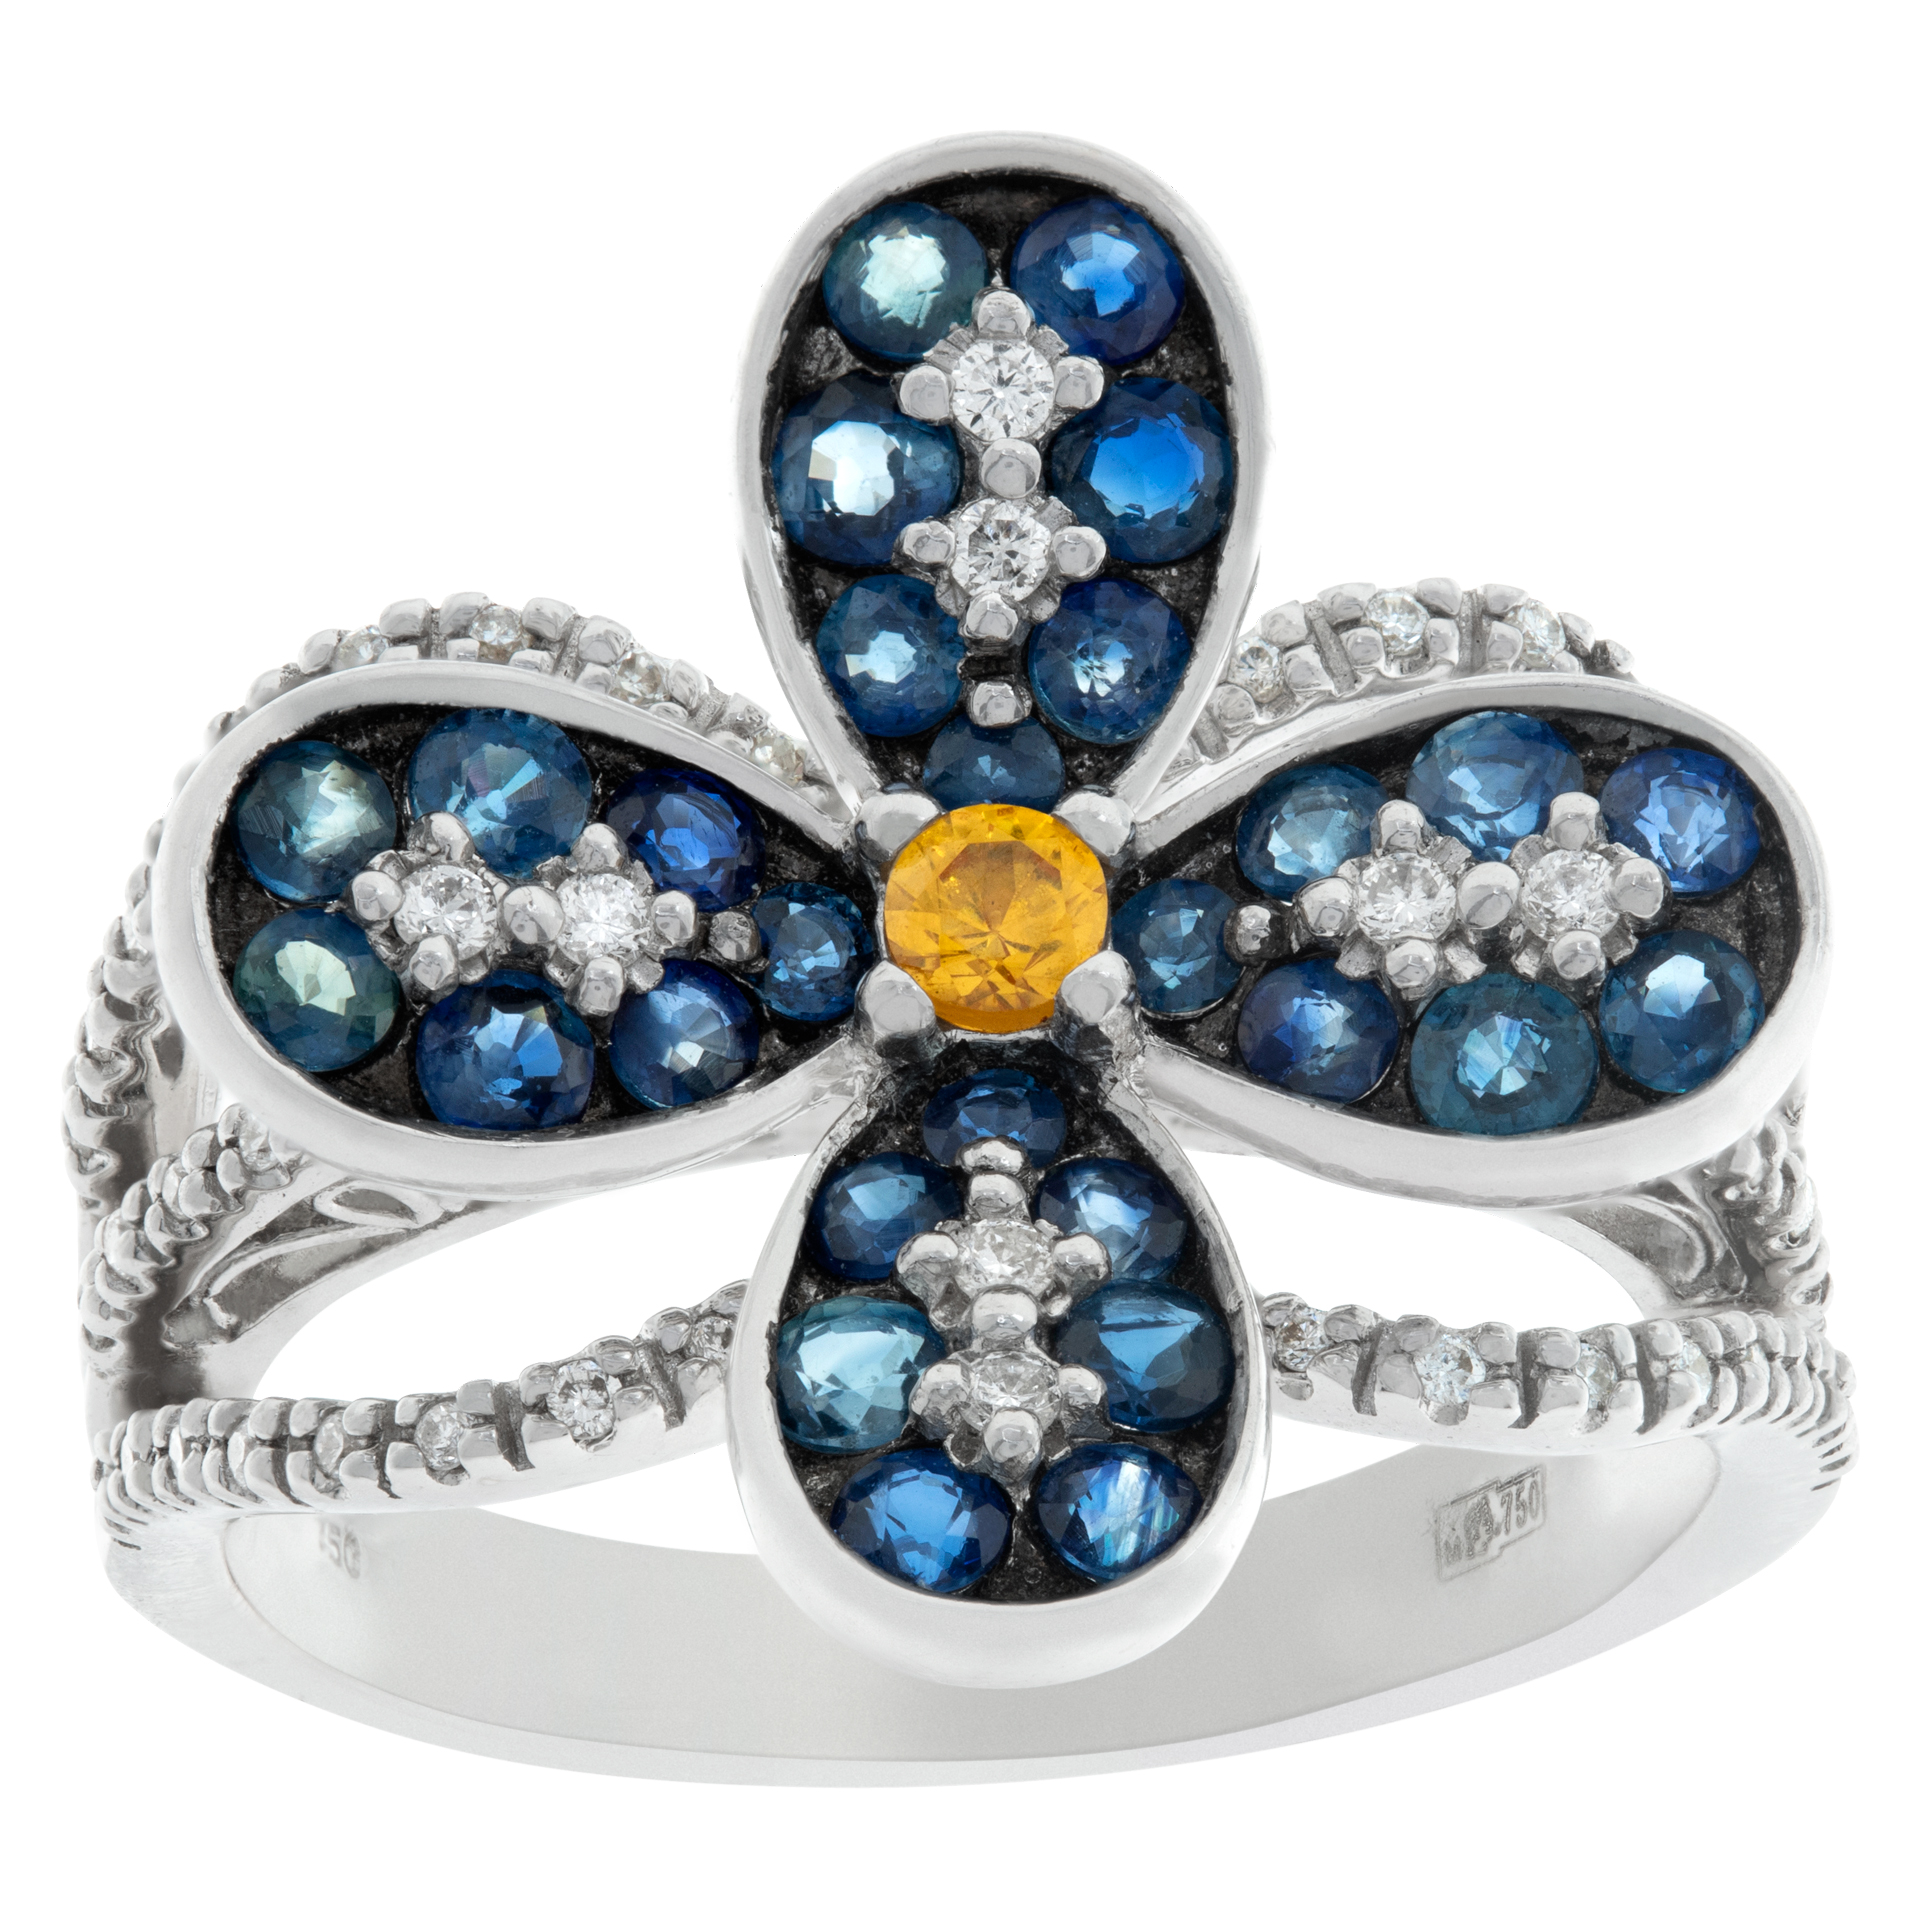 Colorful floral design 18k white gold micro pave diamond ring with blue/yellow sapphires image 1